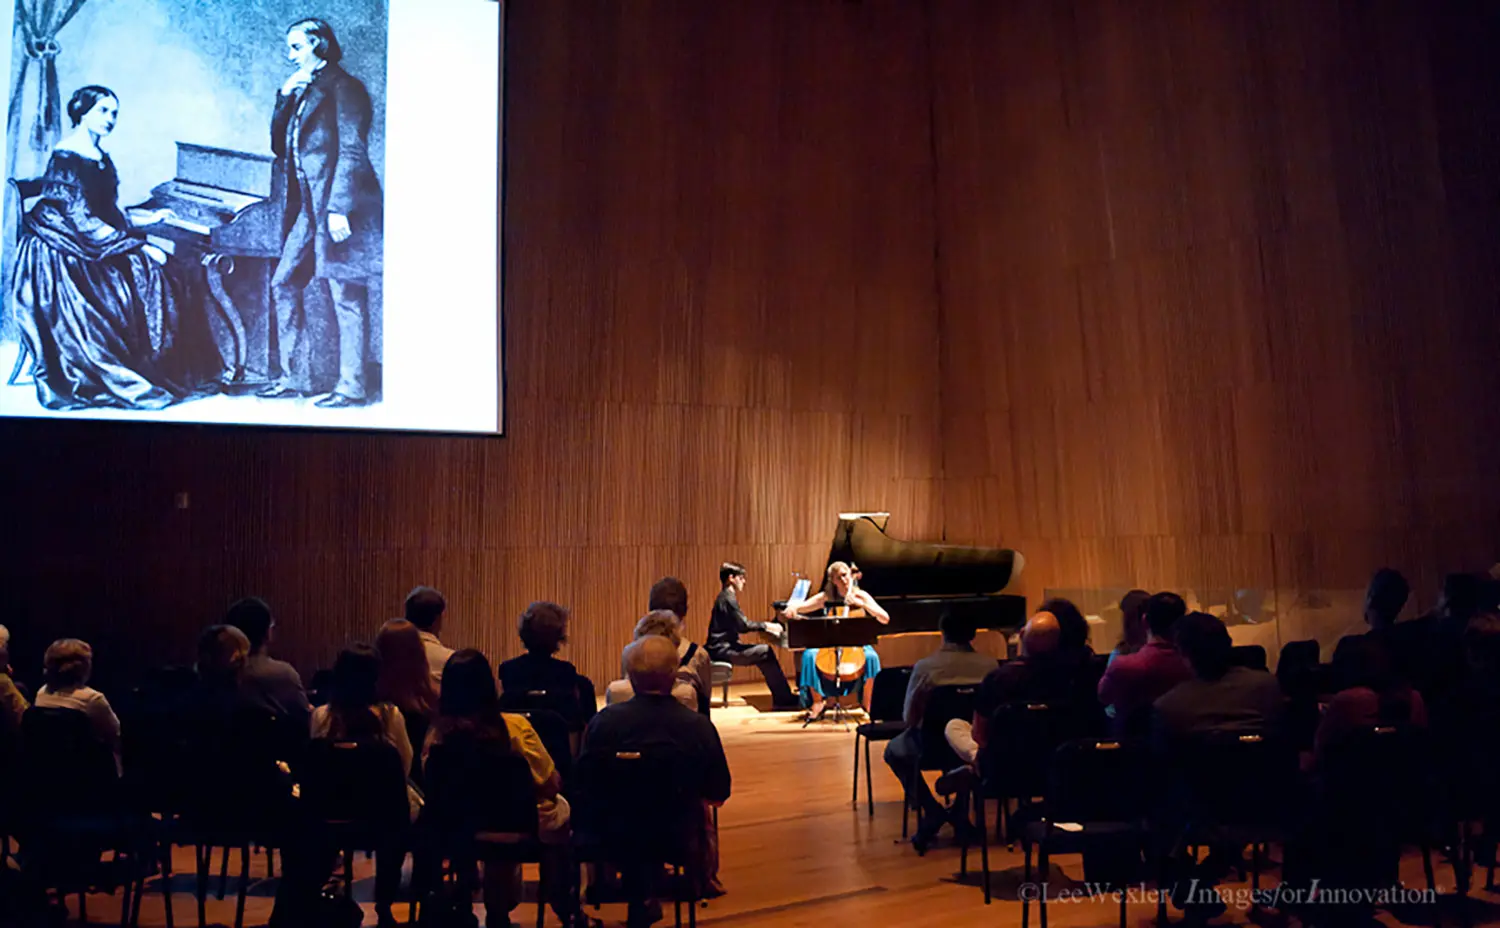 Concert performance with projection — Photo: Lee Wexler